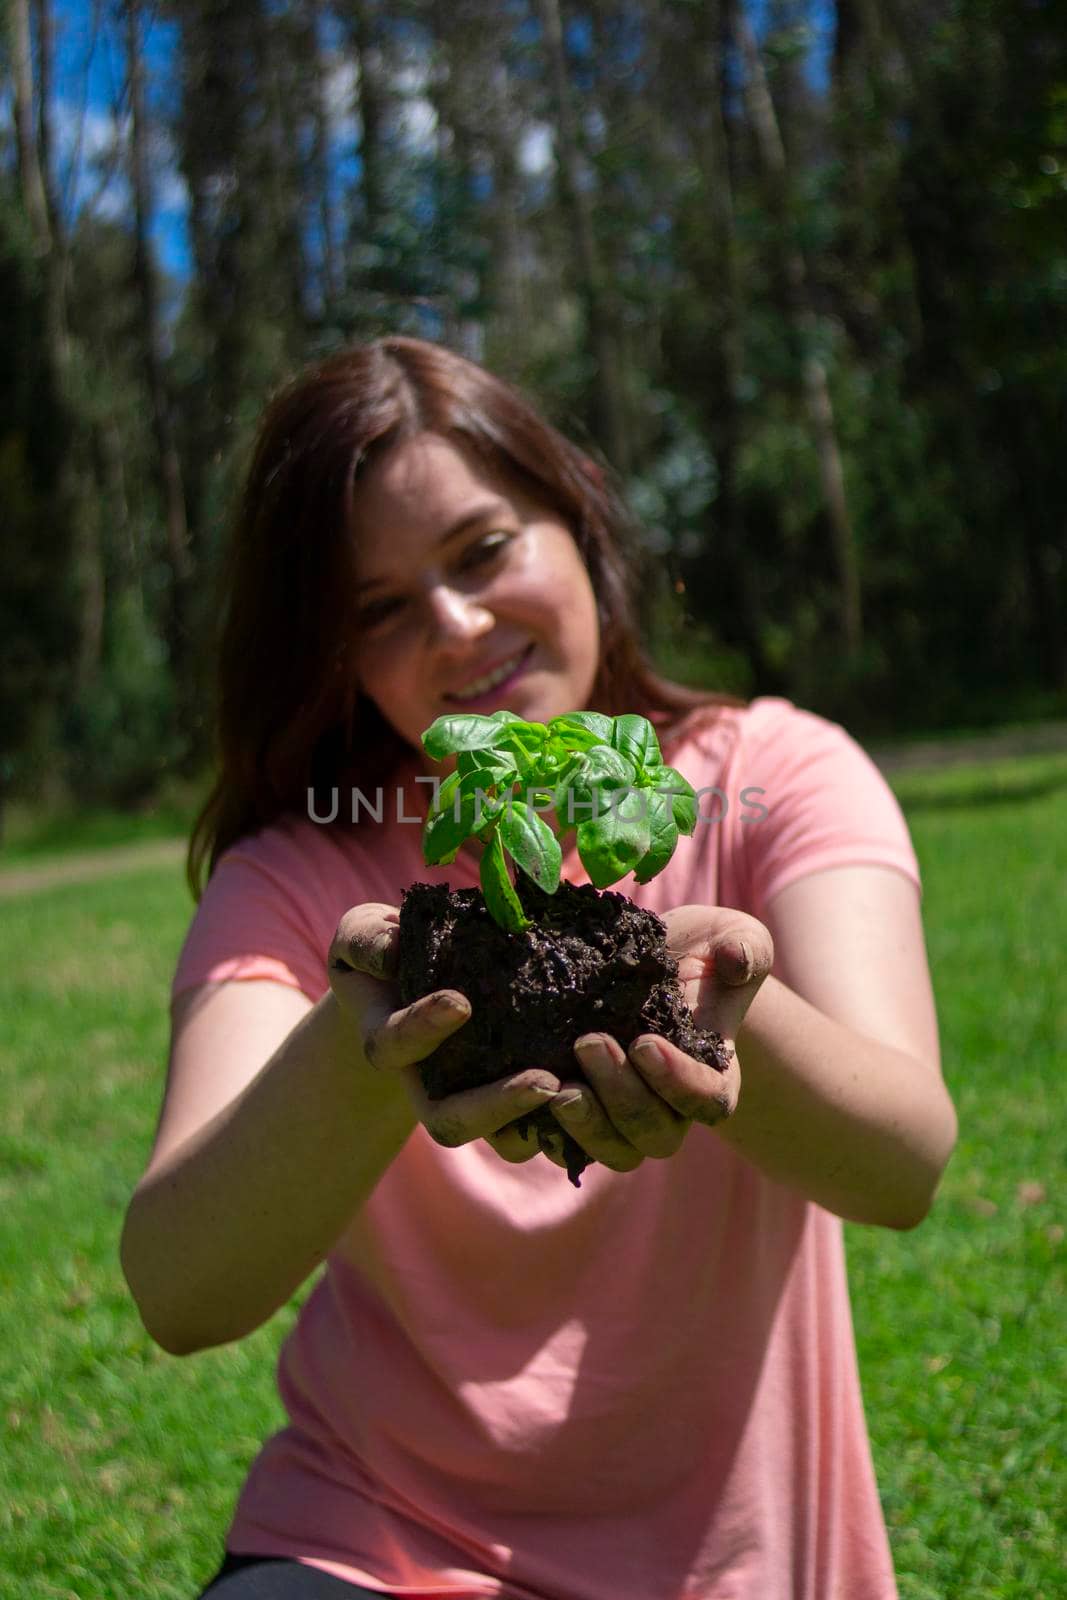 Beautiful young Hispanic woman holding a small plant in her field hands before being planted in a green field surrounded by trees during the morning